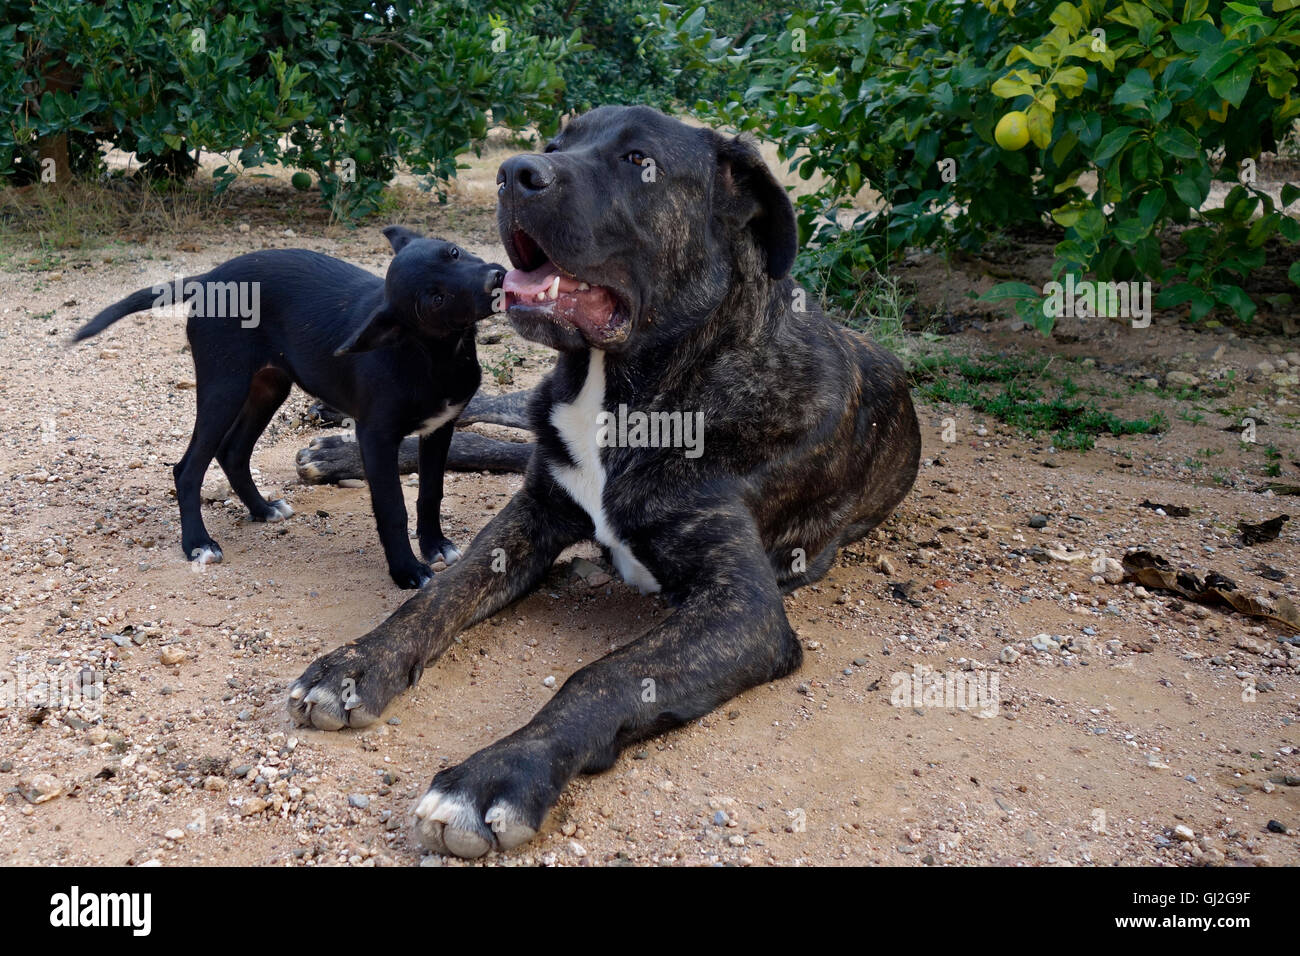 Big and small dogs playing together Stock Photo